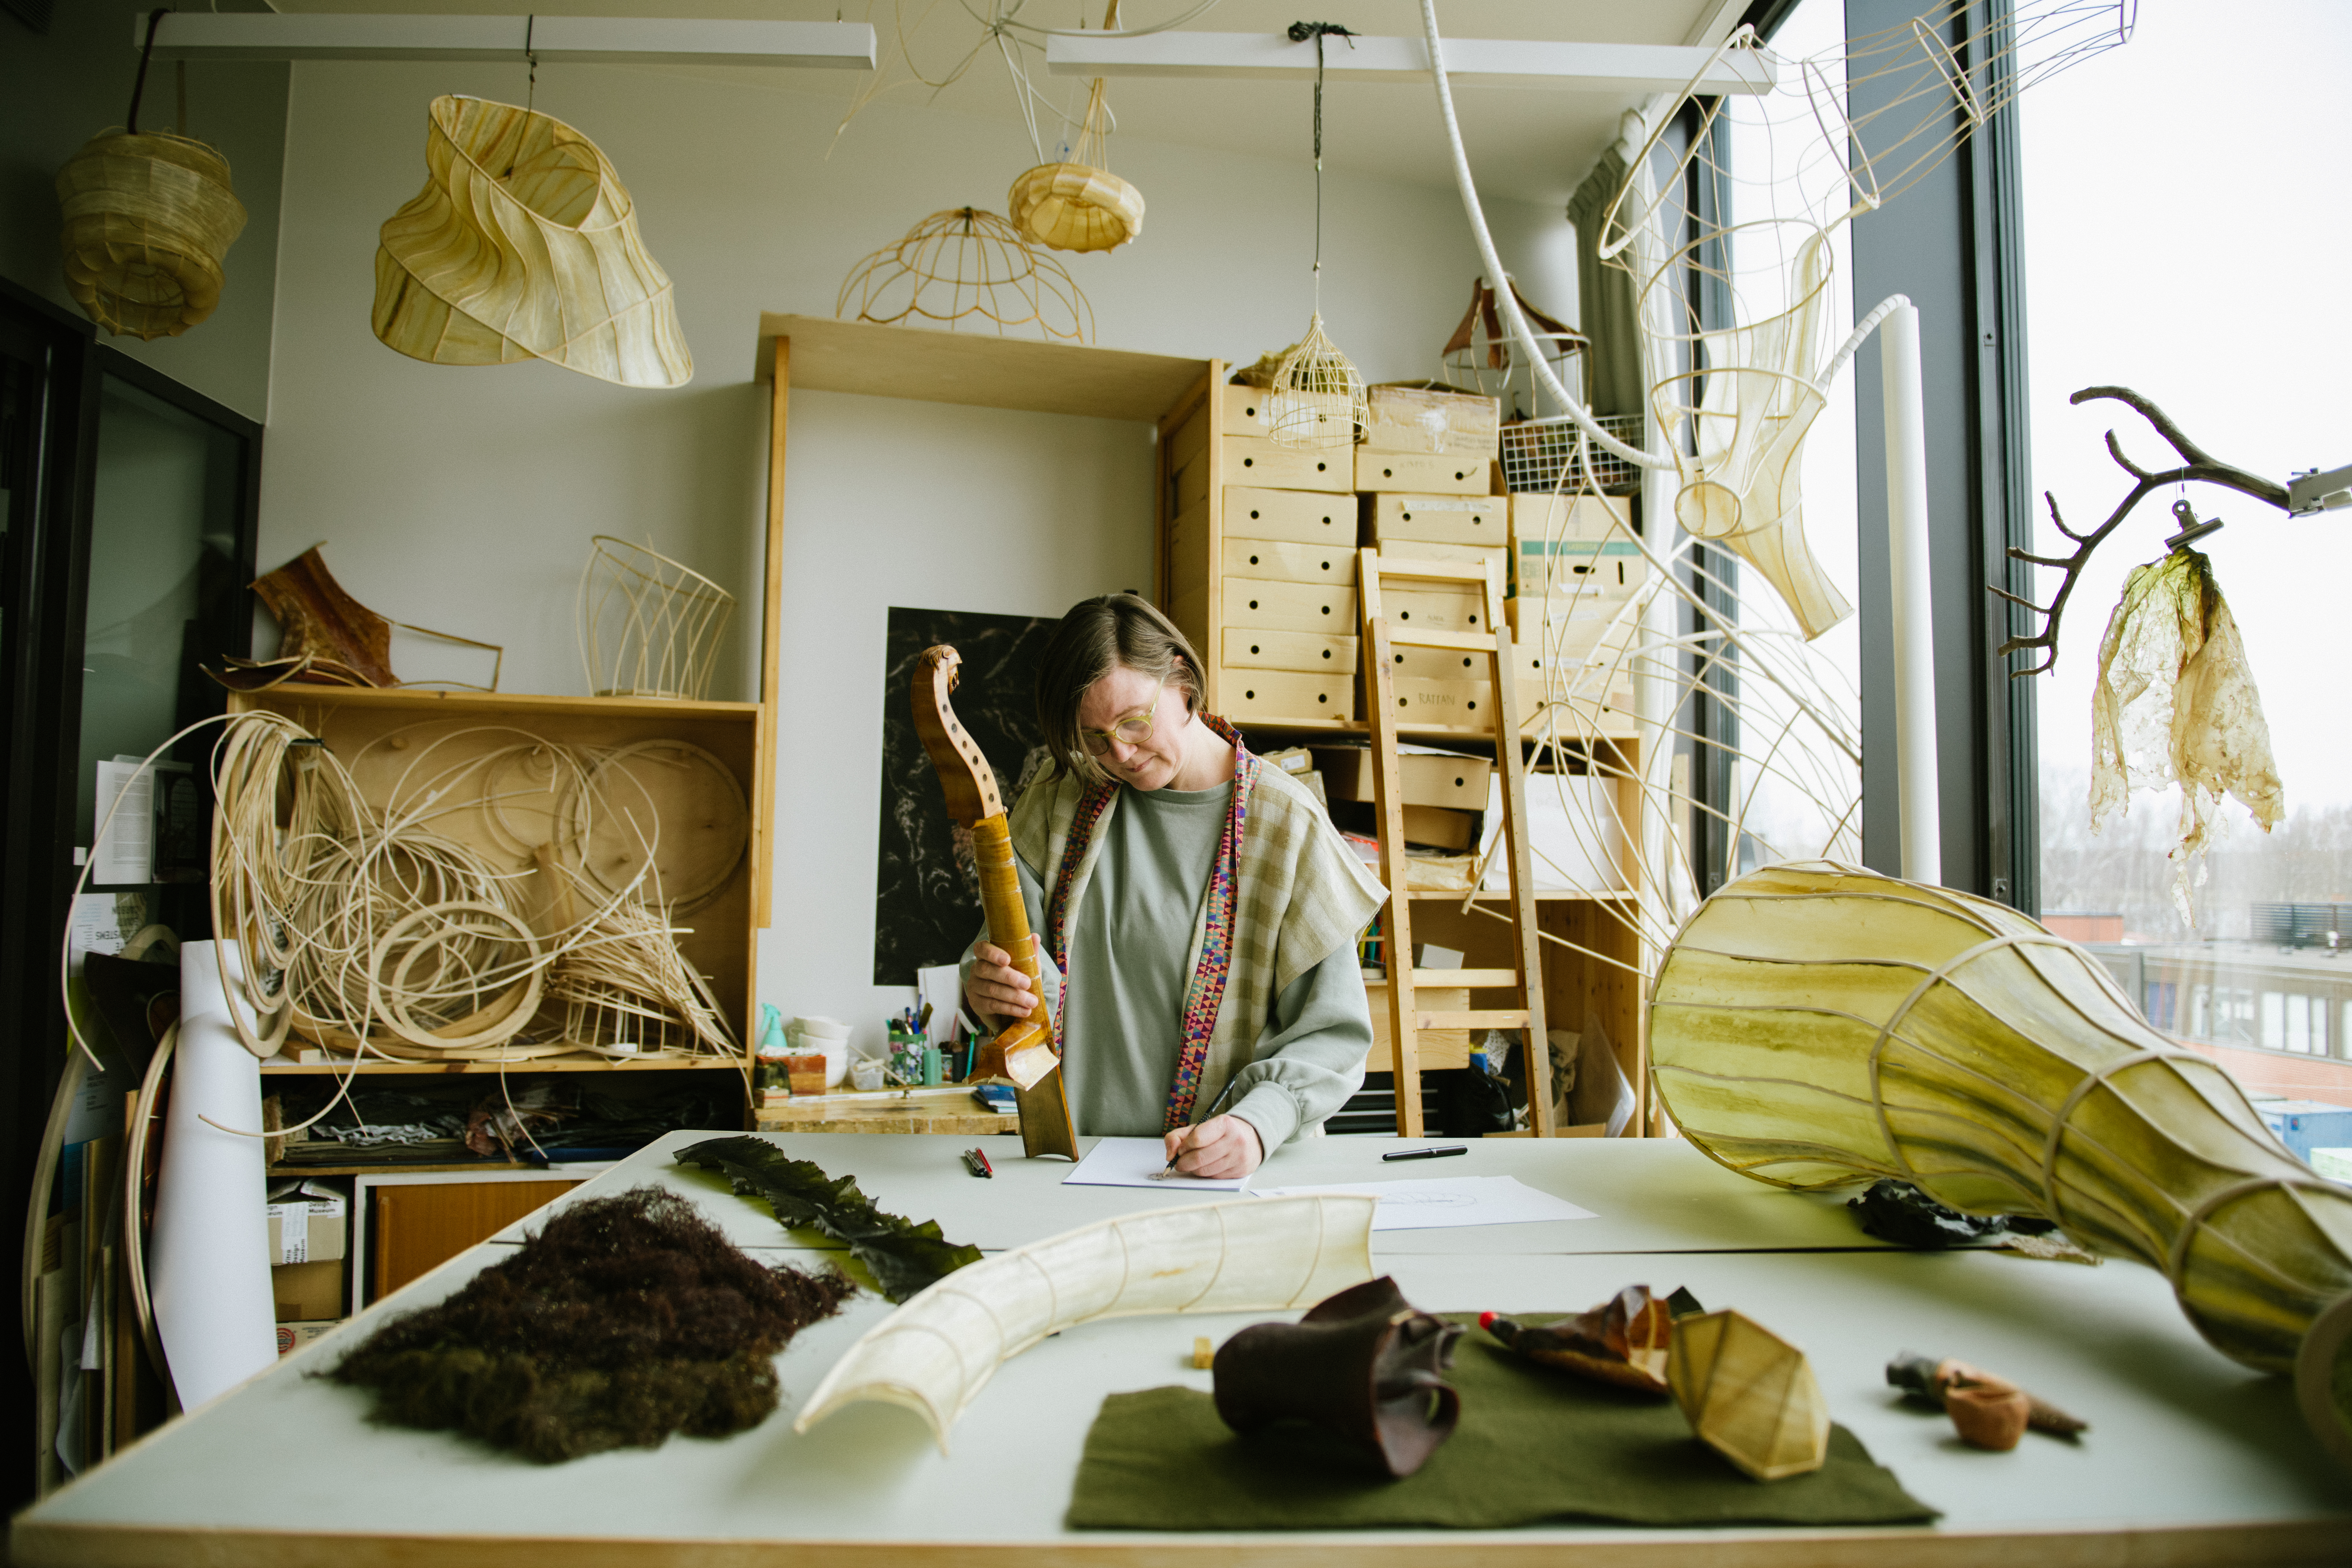 Contemporary design professor, Julia Lohmann, working in her workshop filled with objects made from wood and seaweed.